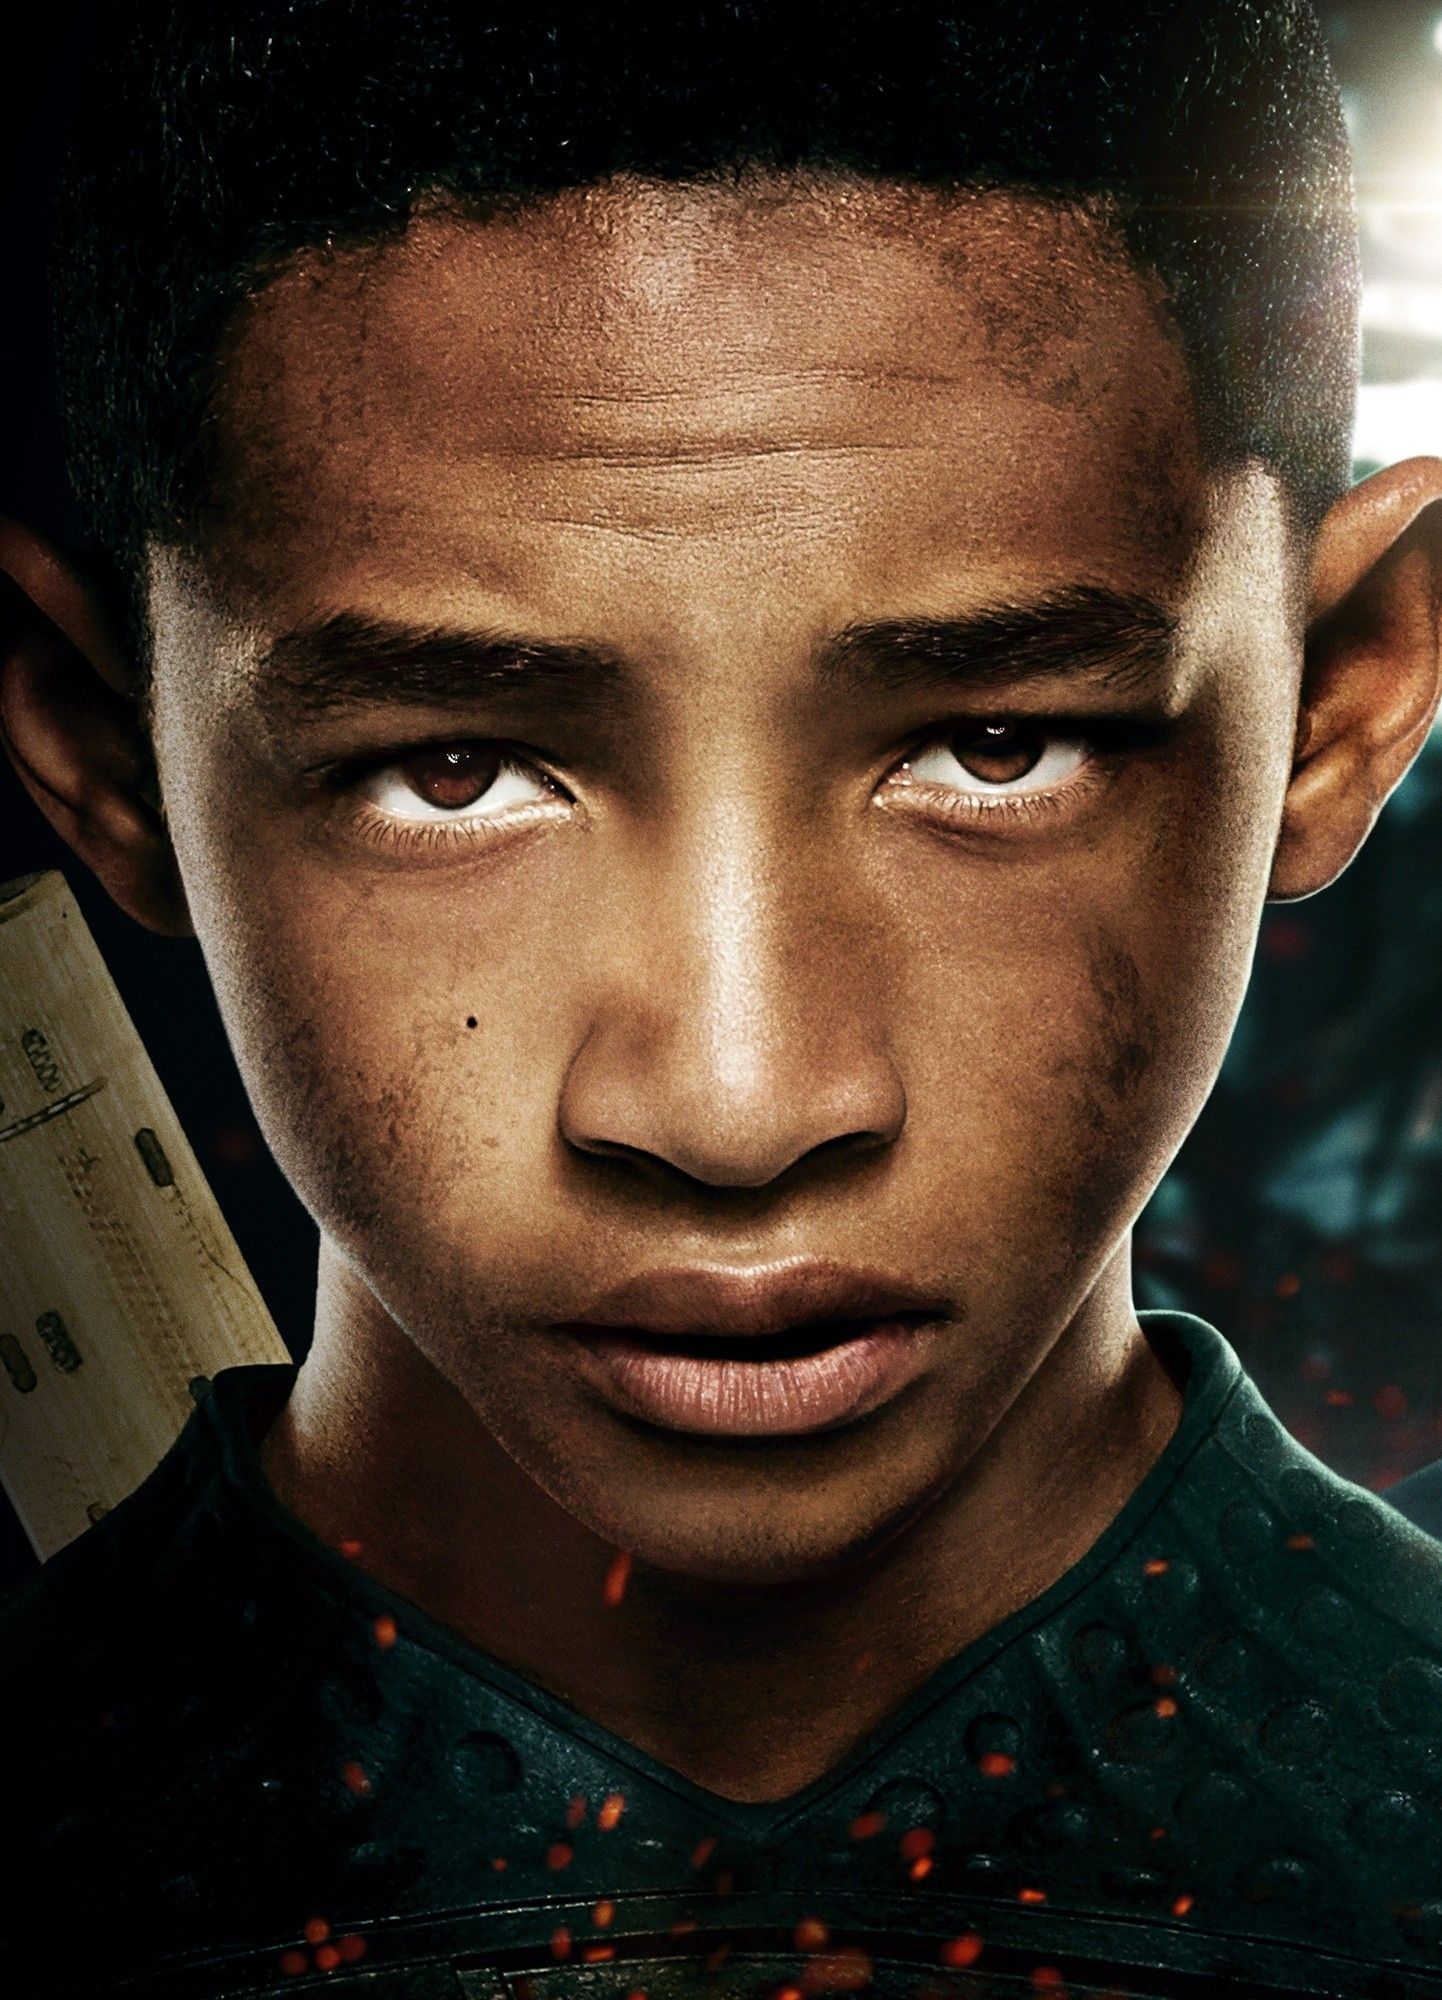 Jaden Smith stars as Kitai Raige in Columbia Pictures' After Earth (2013)